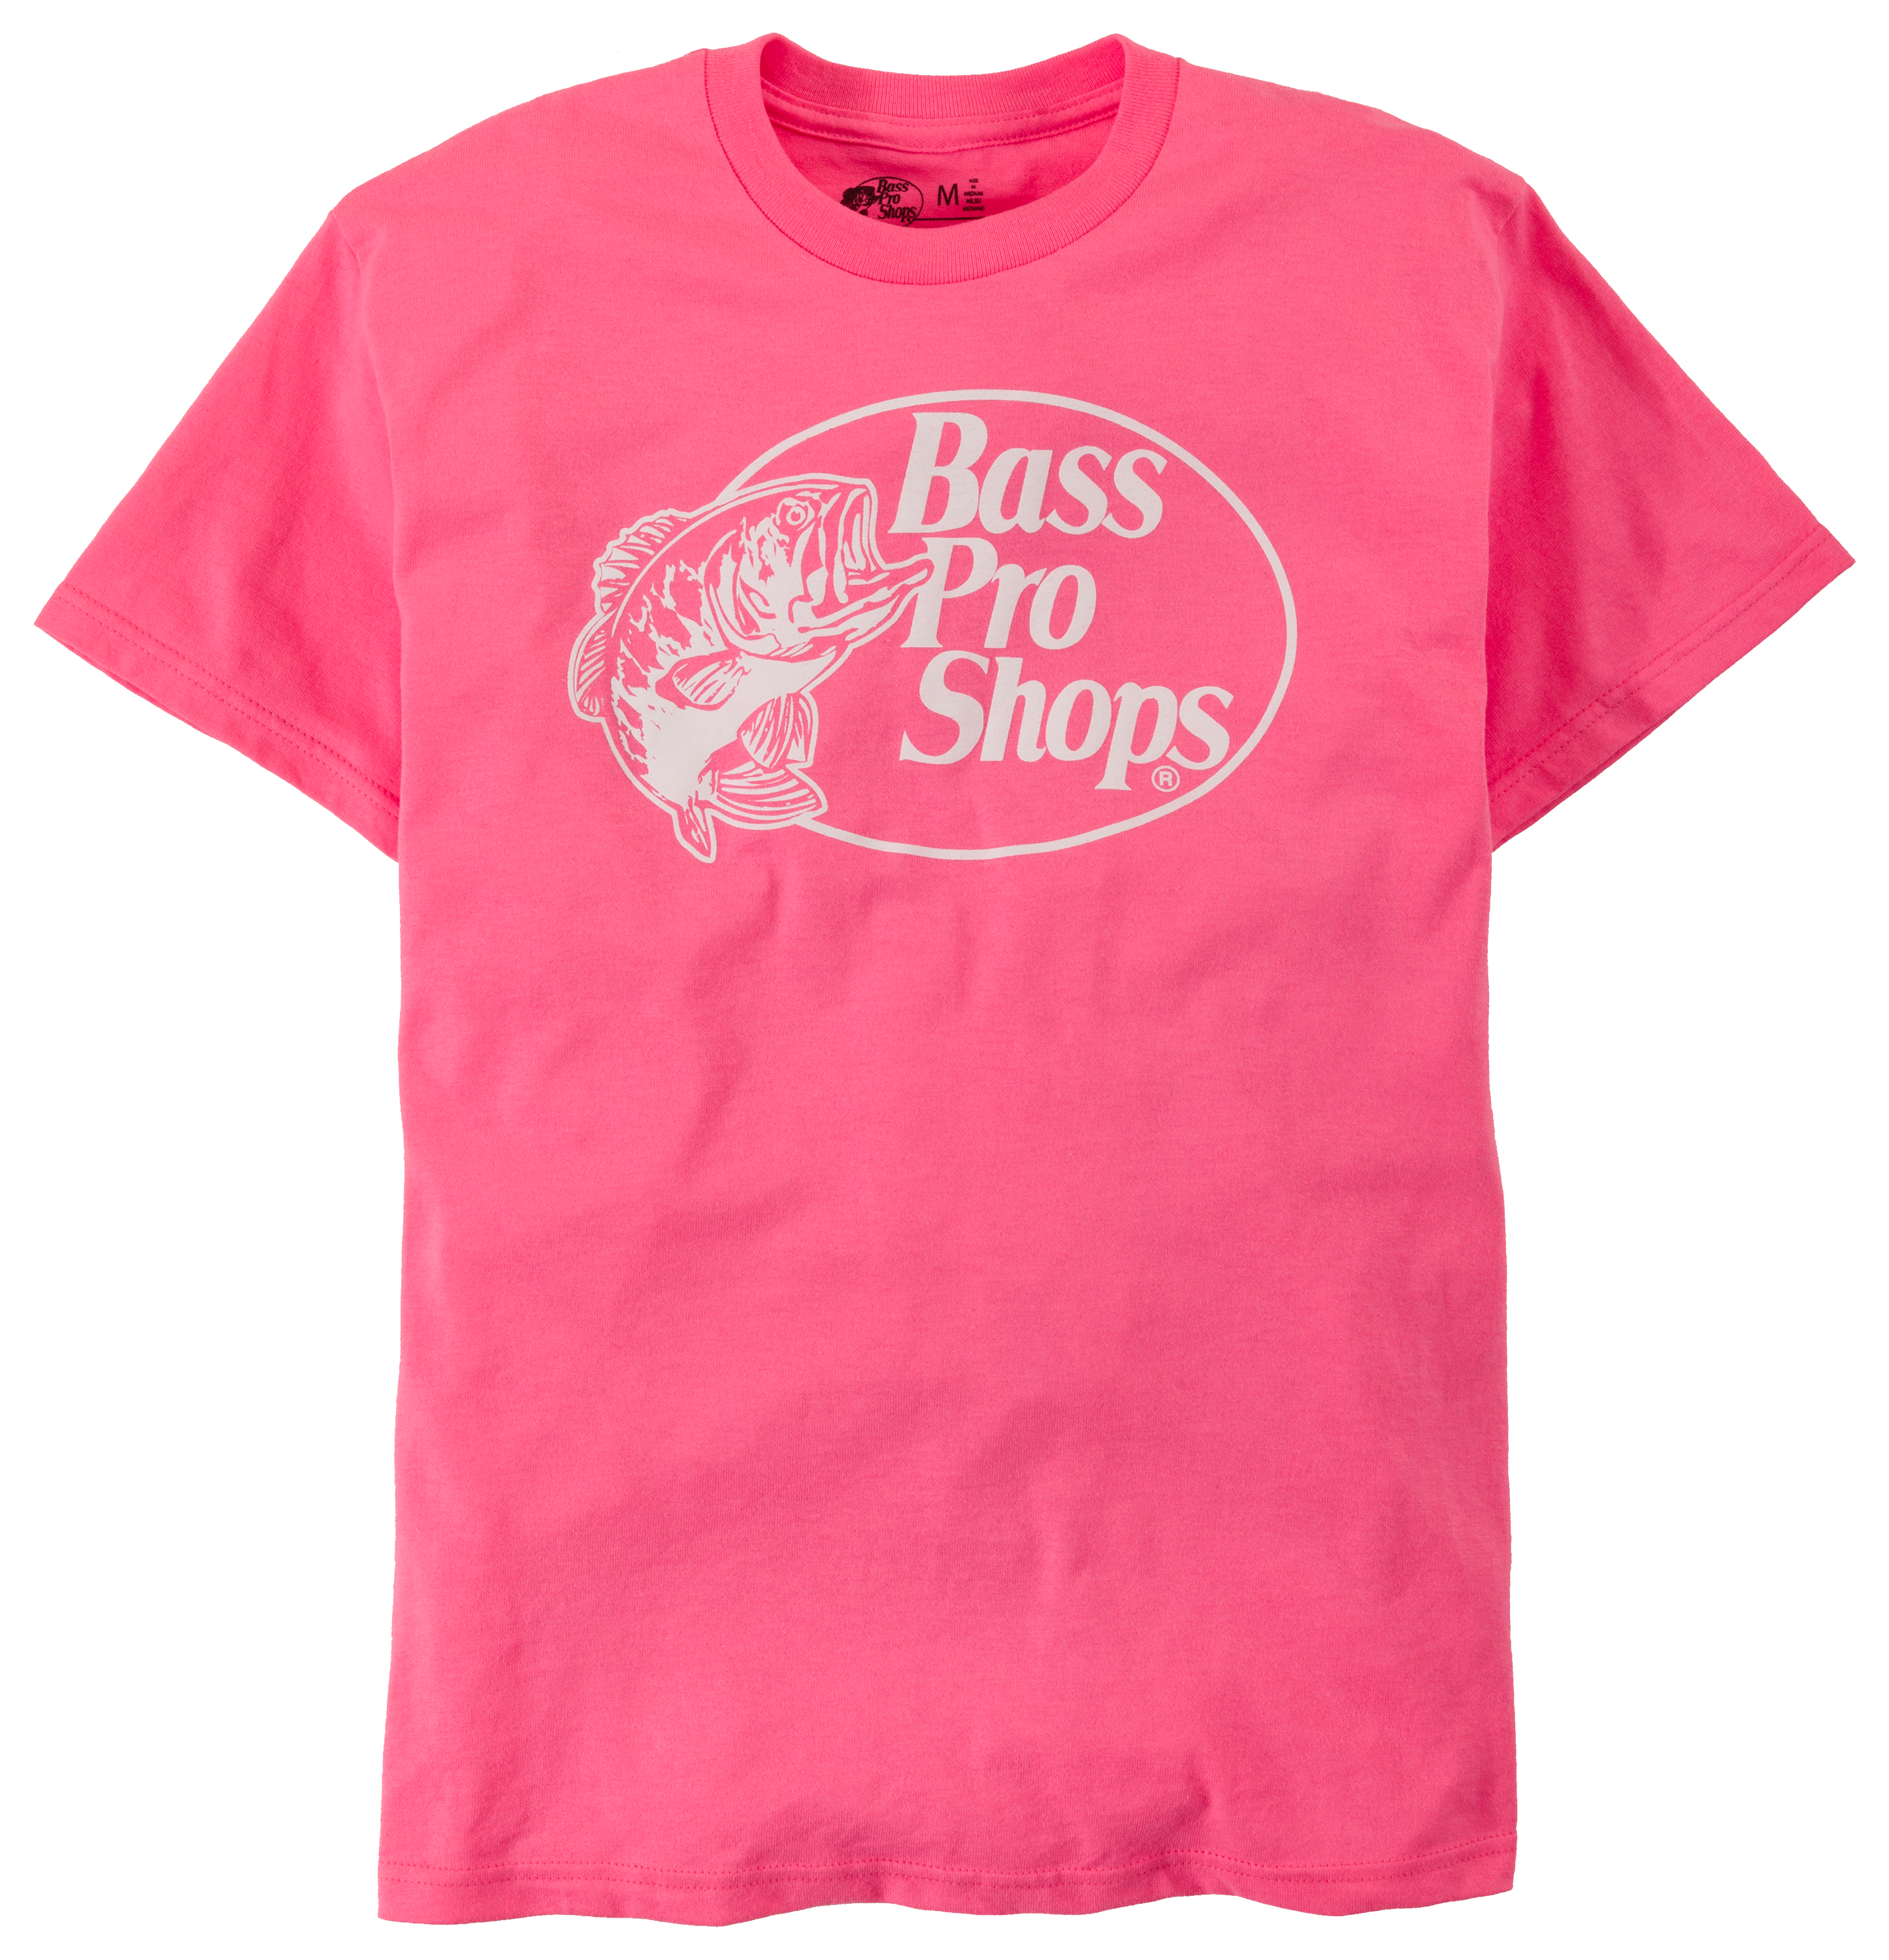 Bass Pro Shops High Visibility Logo T-Shirt for Ladies - Short Sleeve -  Neon Pink